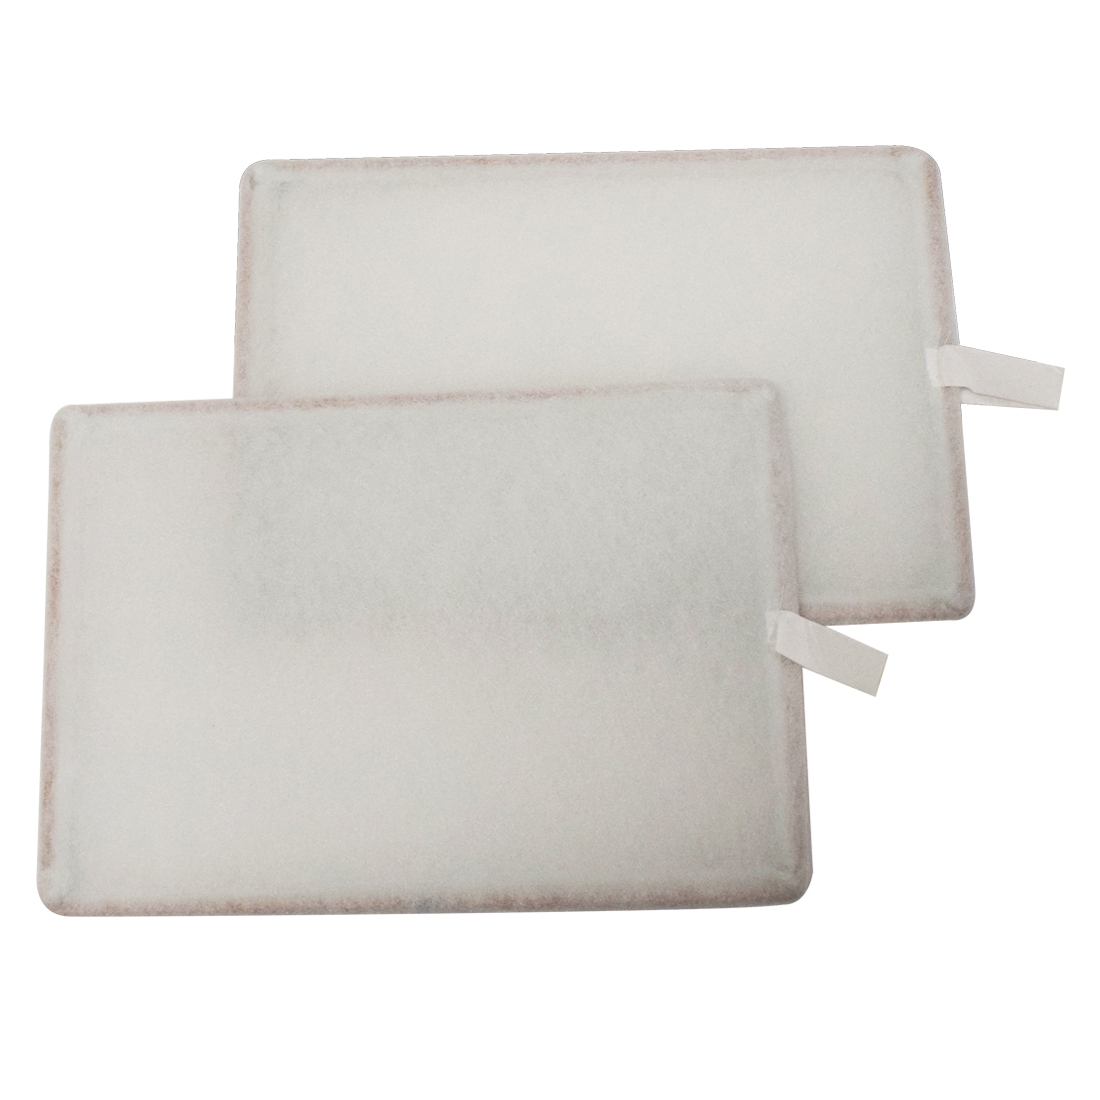 2 x G4 Filters for Vent Axia Kinetic BH Heat Recovery Unit